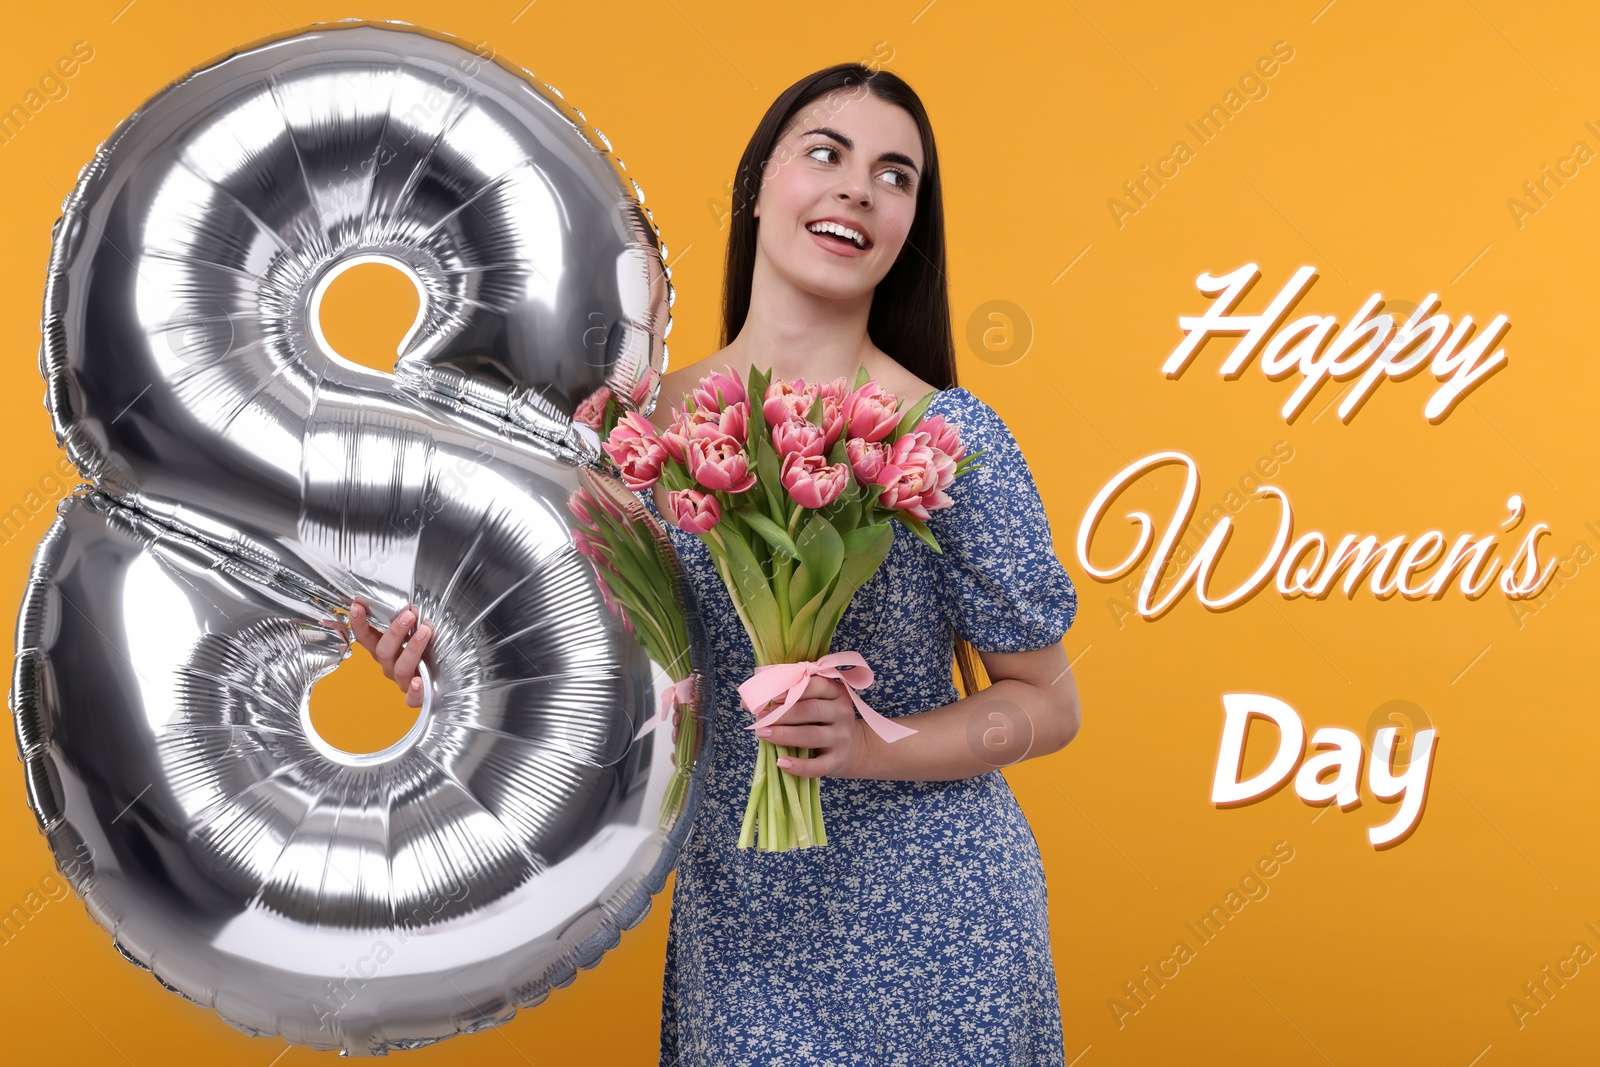 Image of Happy Women's Day - March 8. Attractive lady holding flowers and foil balloon in shape of number 8 on orange background